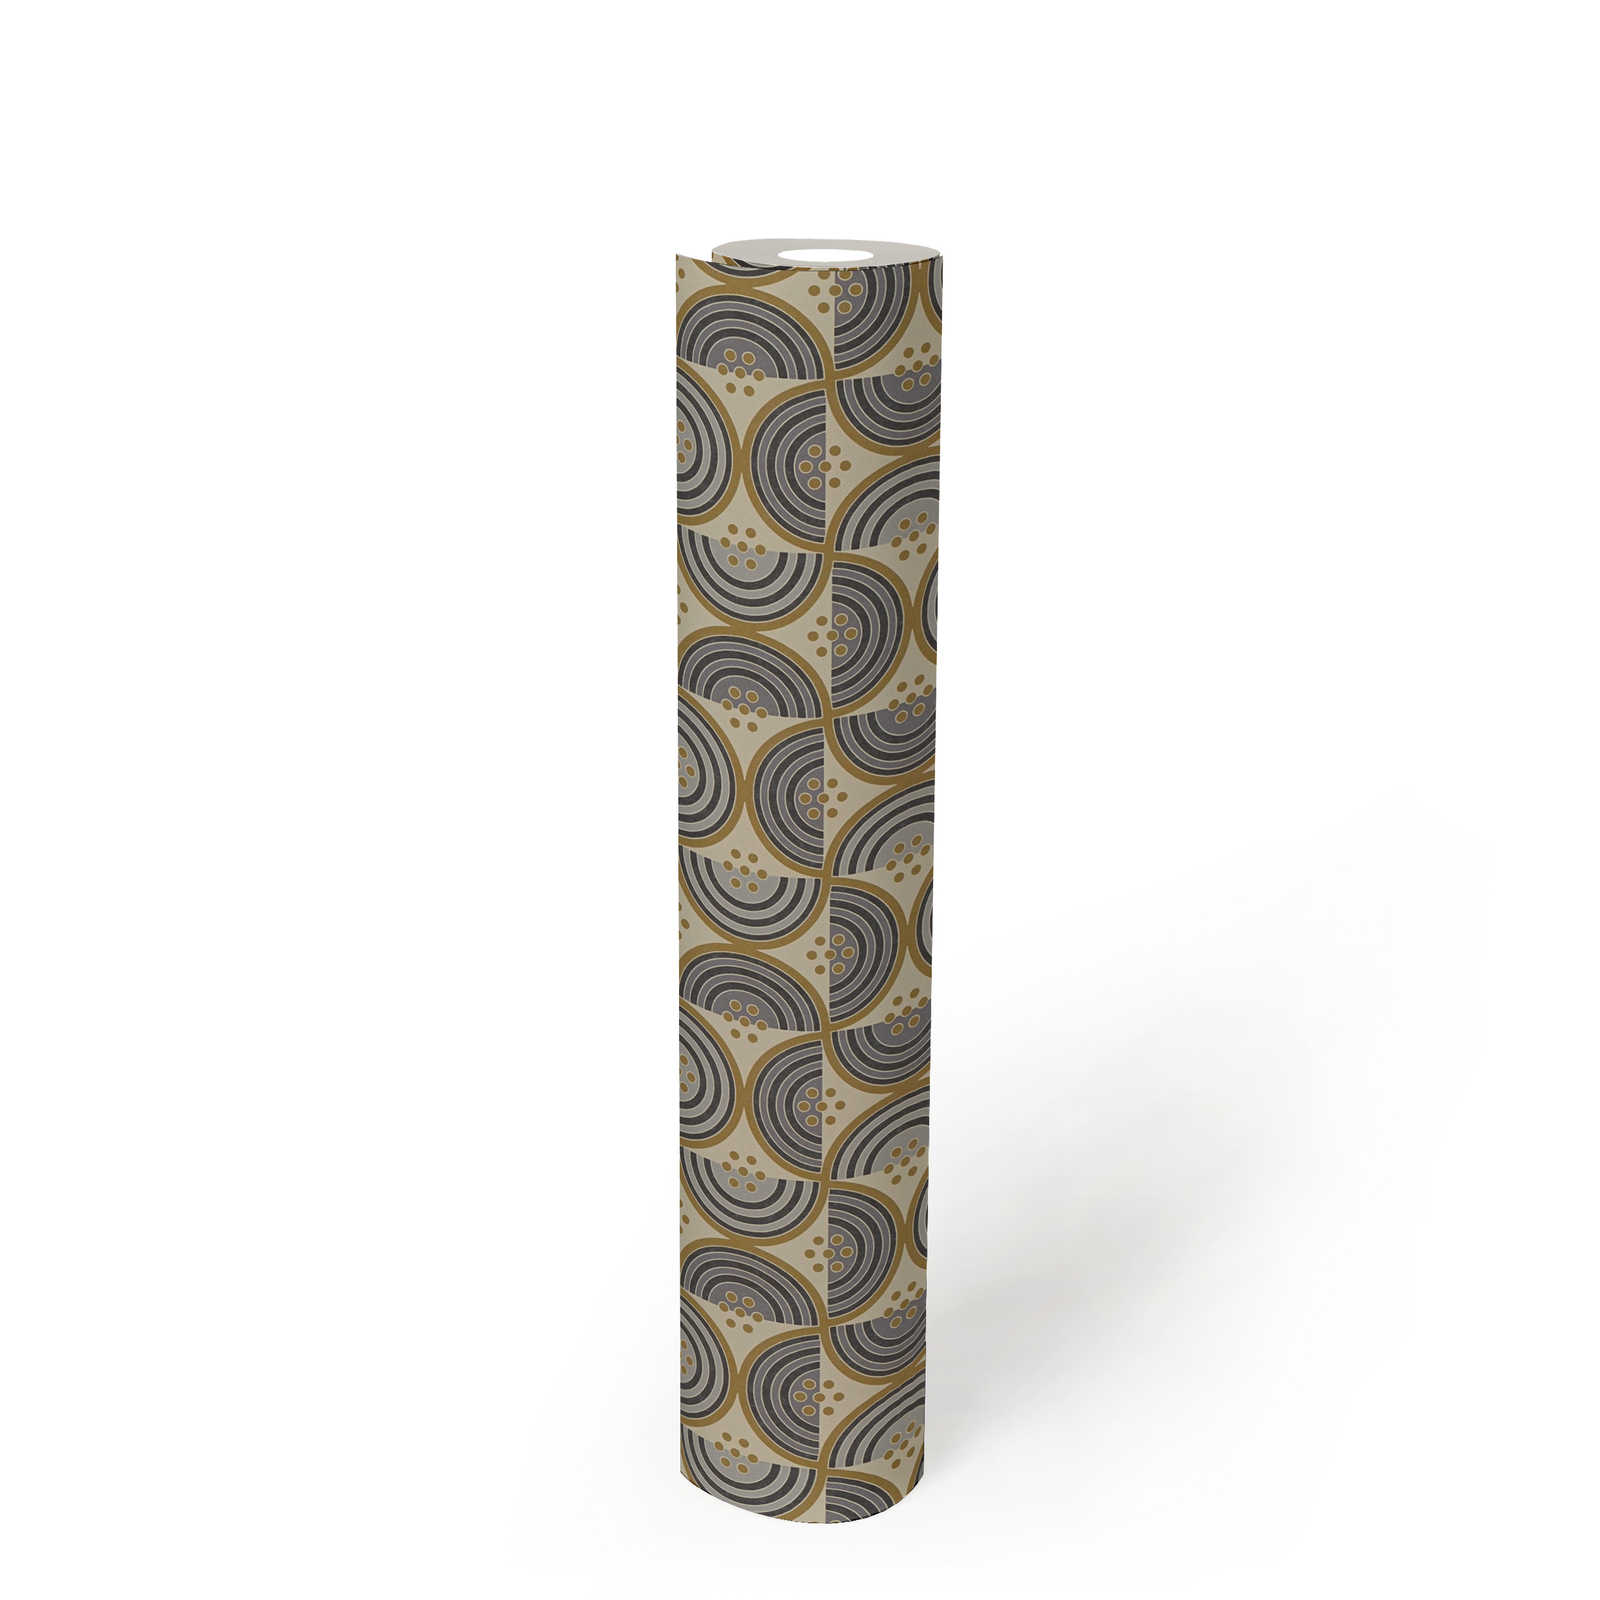             Non-woven wallpaper with square pattern of semicircles and dots - yellow, grey, black
        